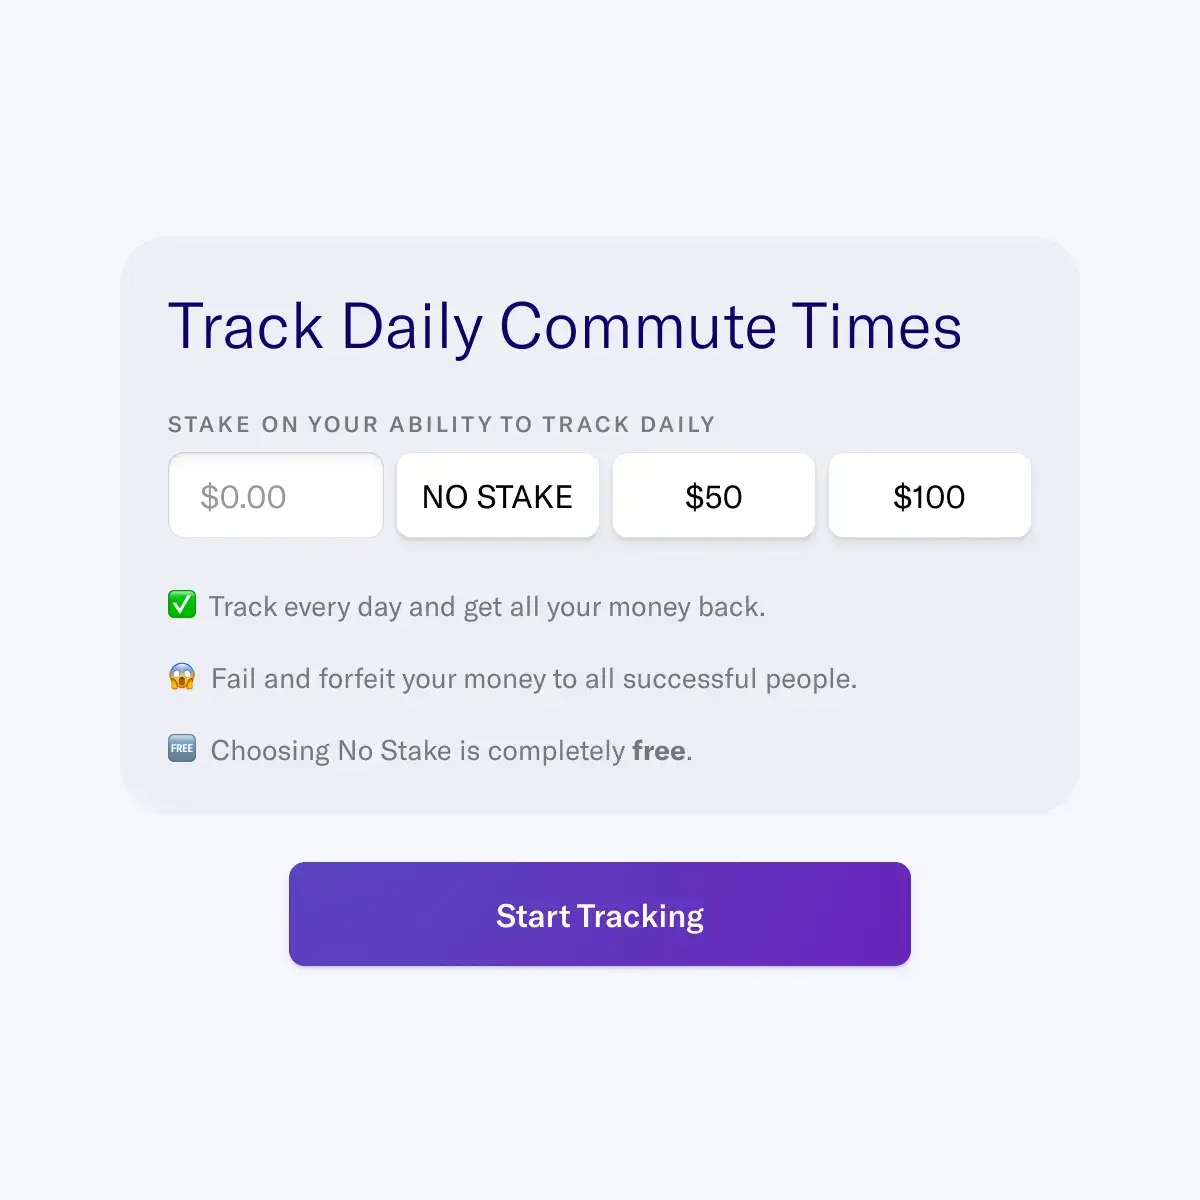 Stake money on your ability to follow through with tracking so you have extra incentive to log your activities each day - alternatively use free and receive all the same features